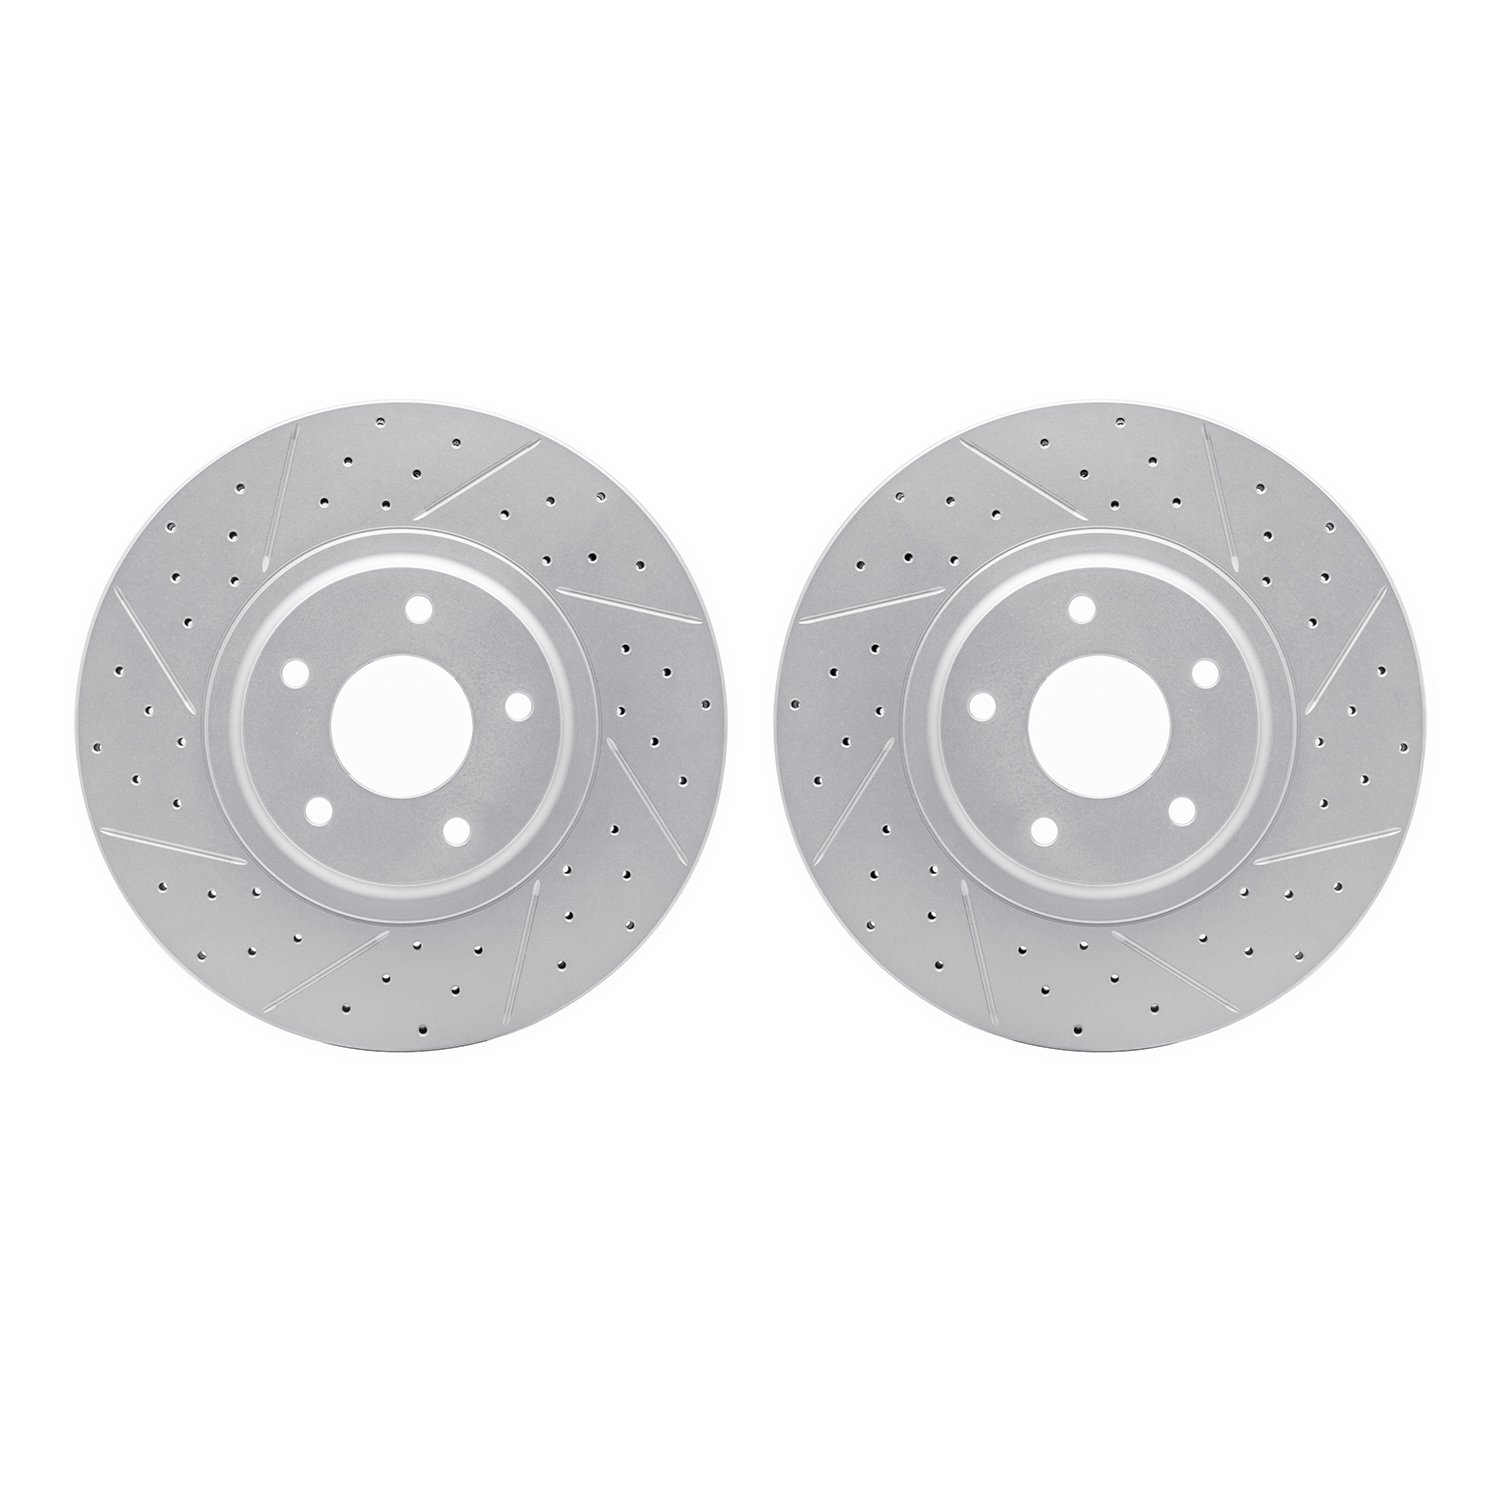 2002-67033 Geoperformance Drilled/Slotted Brake Rotors, 2003-2005 Infiniti/Nissan, Position: Front